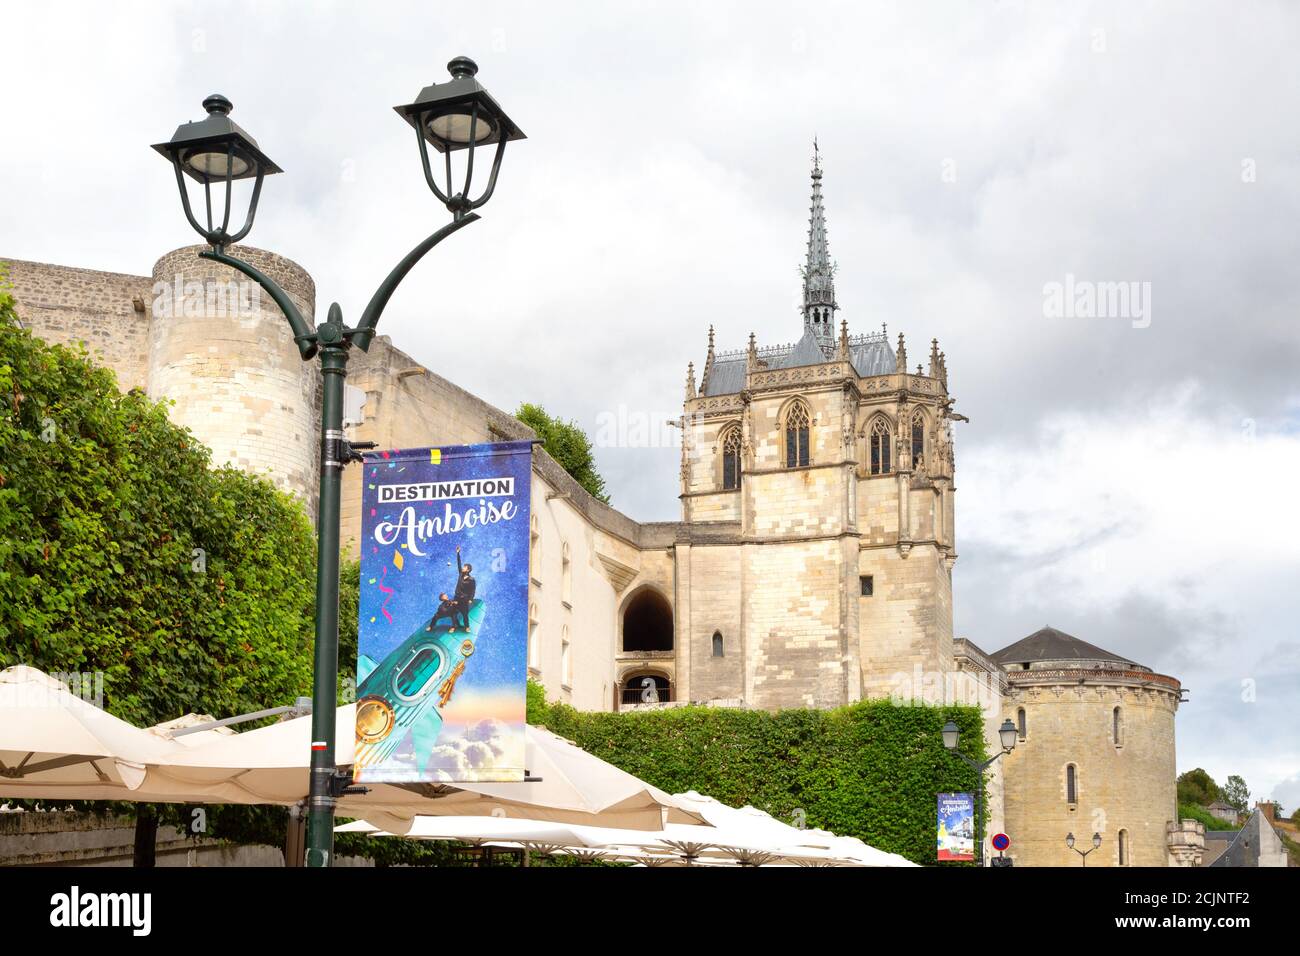 France travel - a travel poster, the Chapel of Saint Hubert and the medieval Chateau D'Amboise (Amboise Chateau), Amboise, Loire Valley, France Europe Stock Photo